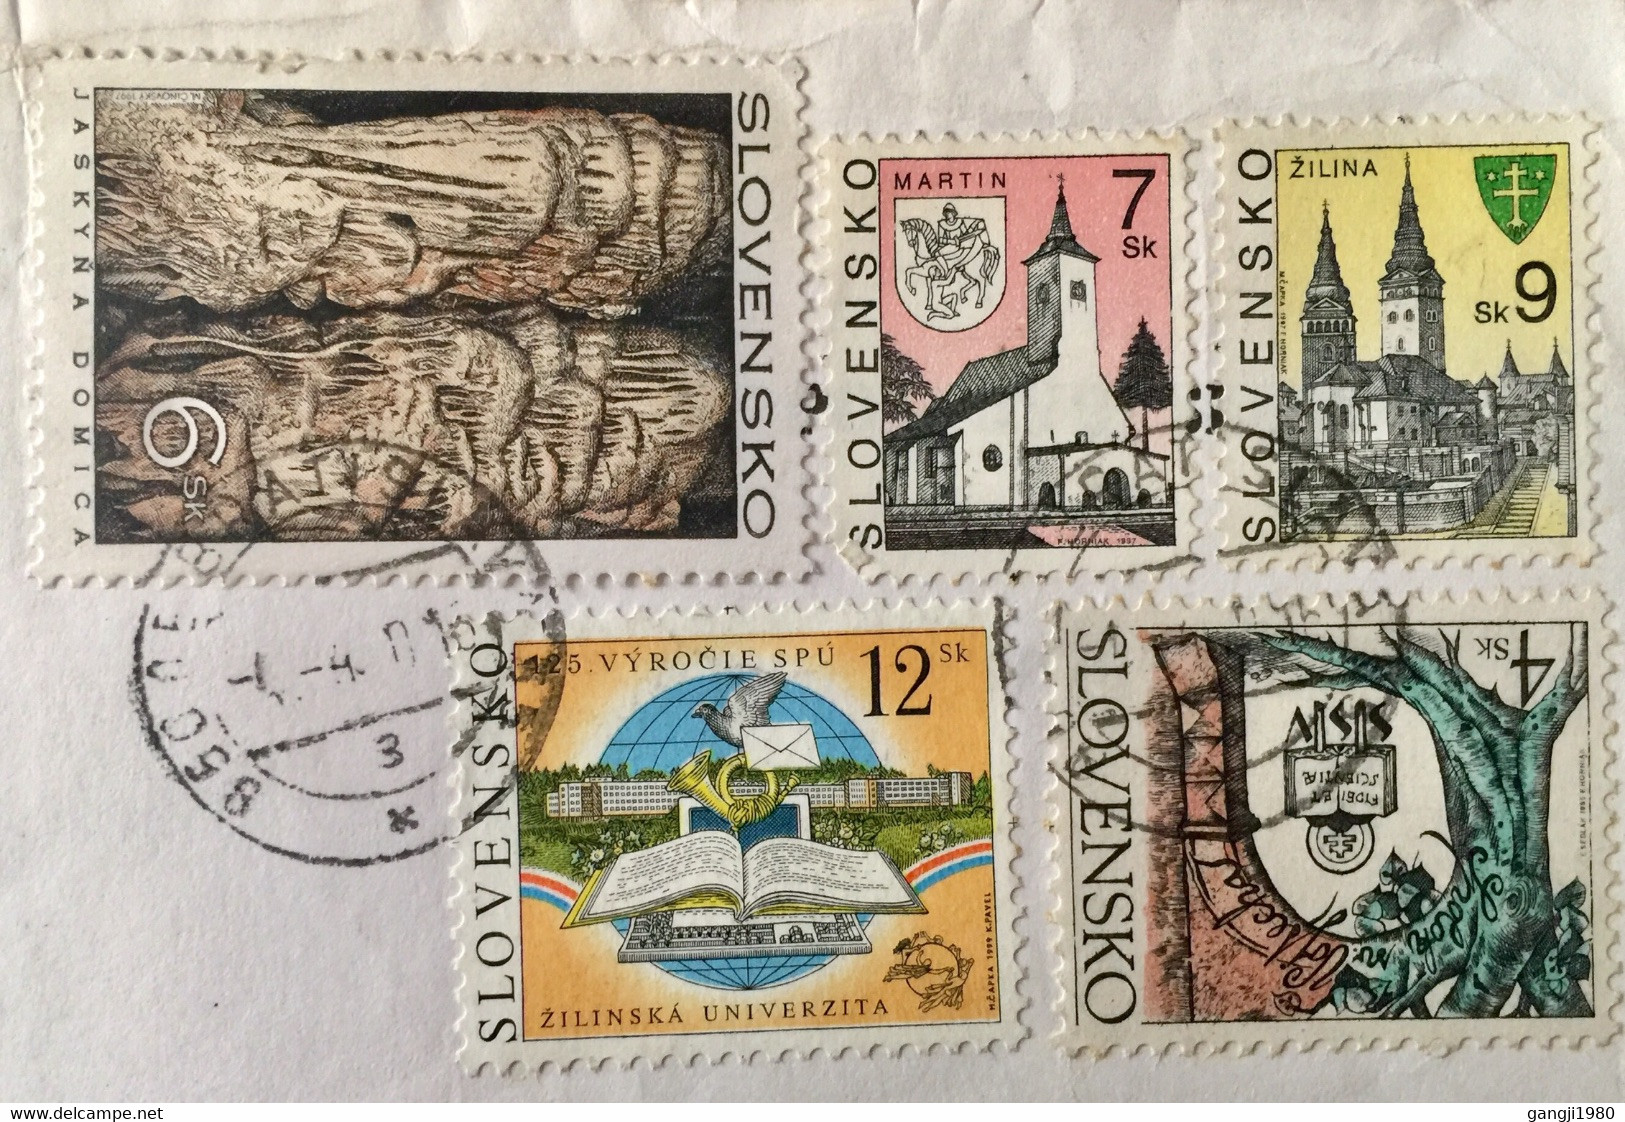 SLOVAKIA 2000, REGISTERED AIRMAIL COVER TO INDIA,5 STAMPS ,MARTIN ZILINA ,ZILINSKA UNIVERSITY JASKYNA DOMICA ,TREE - Covers & Documents